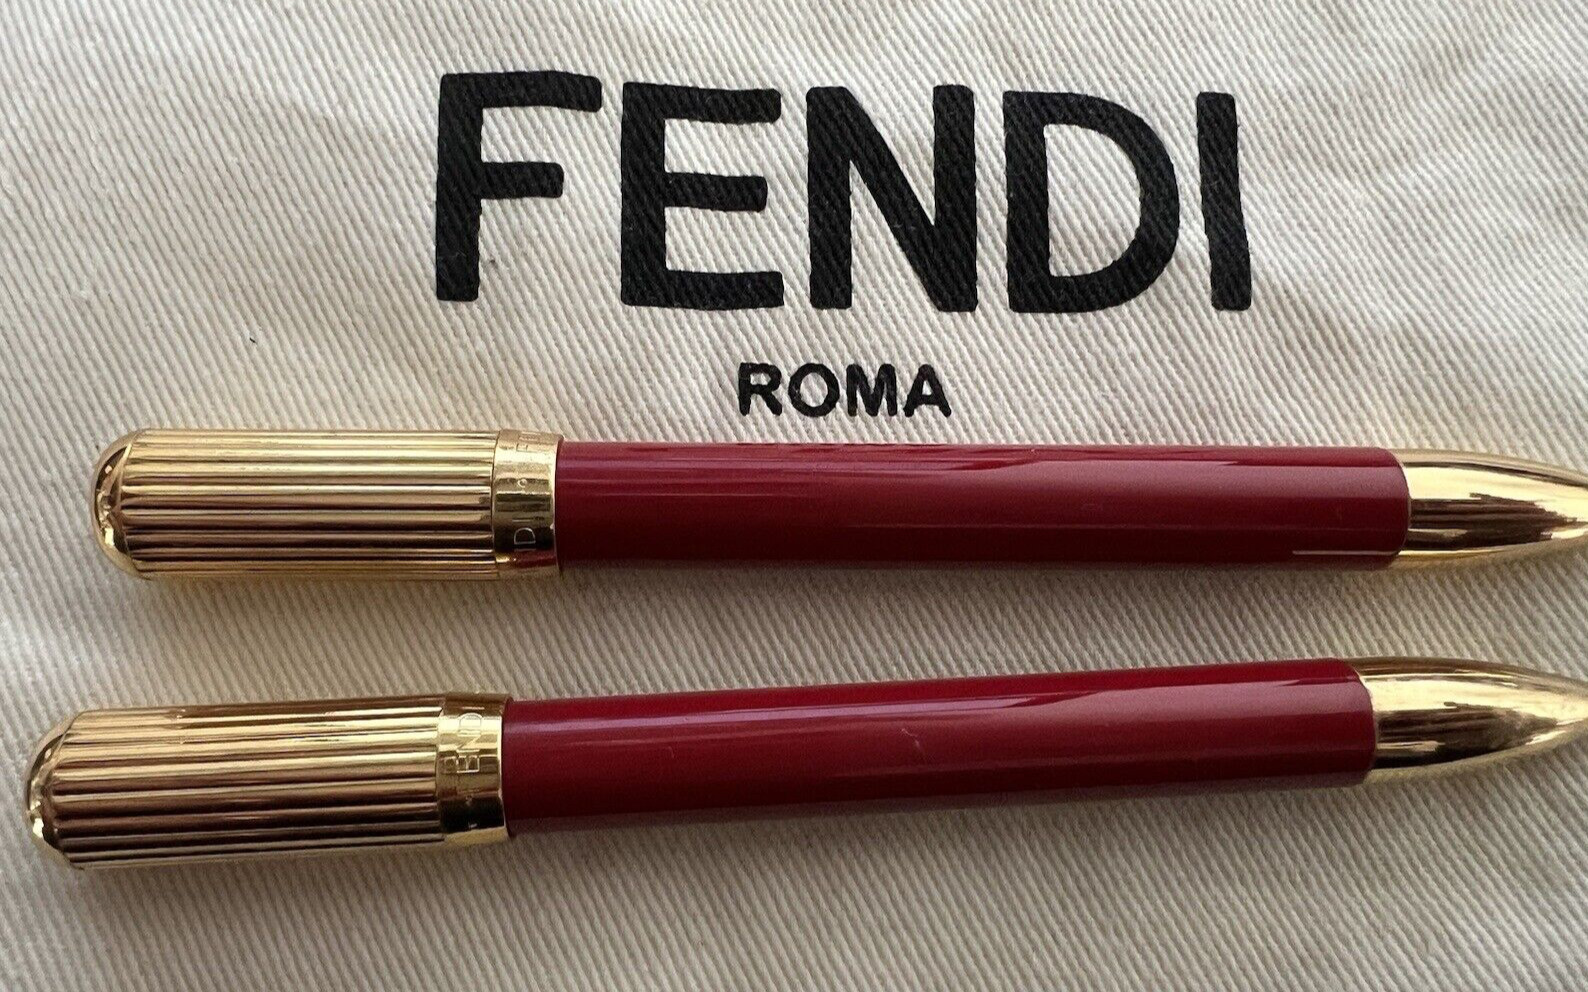 Fendi Pen Sphere Lacquer Red + Mechanical Pencil Foiled Gold Monogrammers